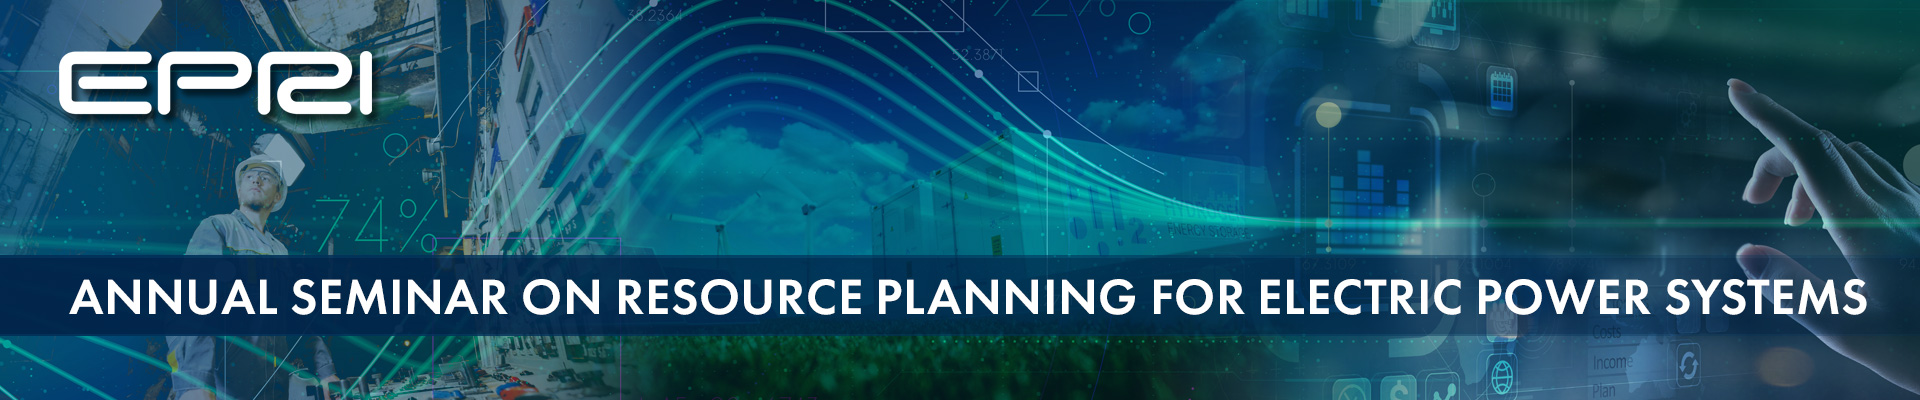 Annual Seminar Resource Planning for Electric Power Systems